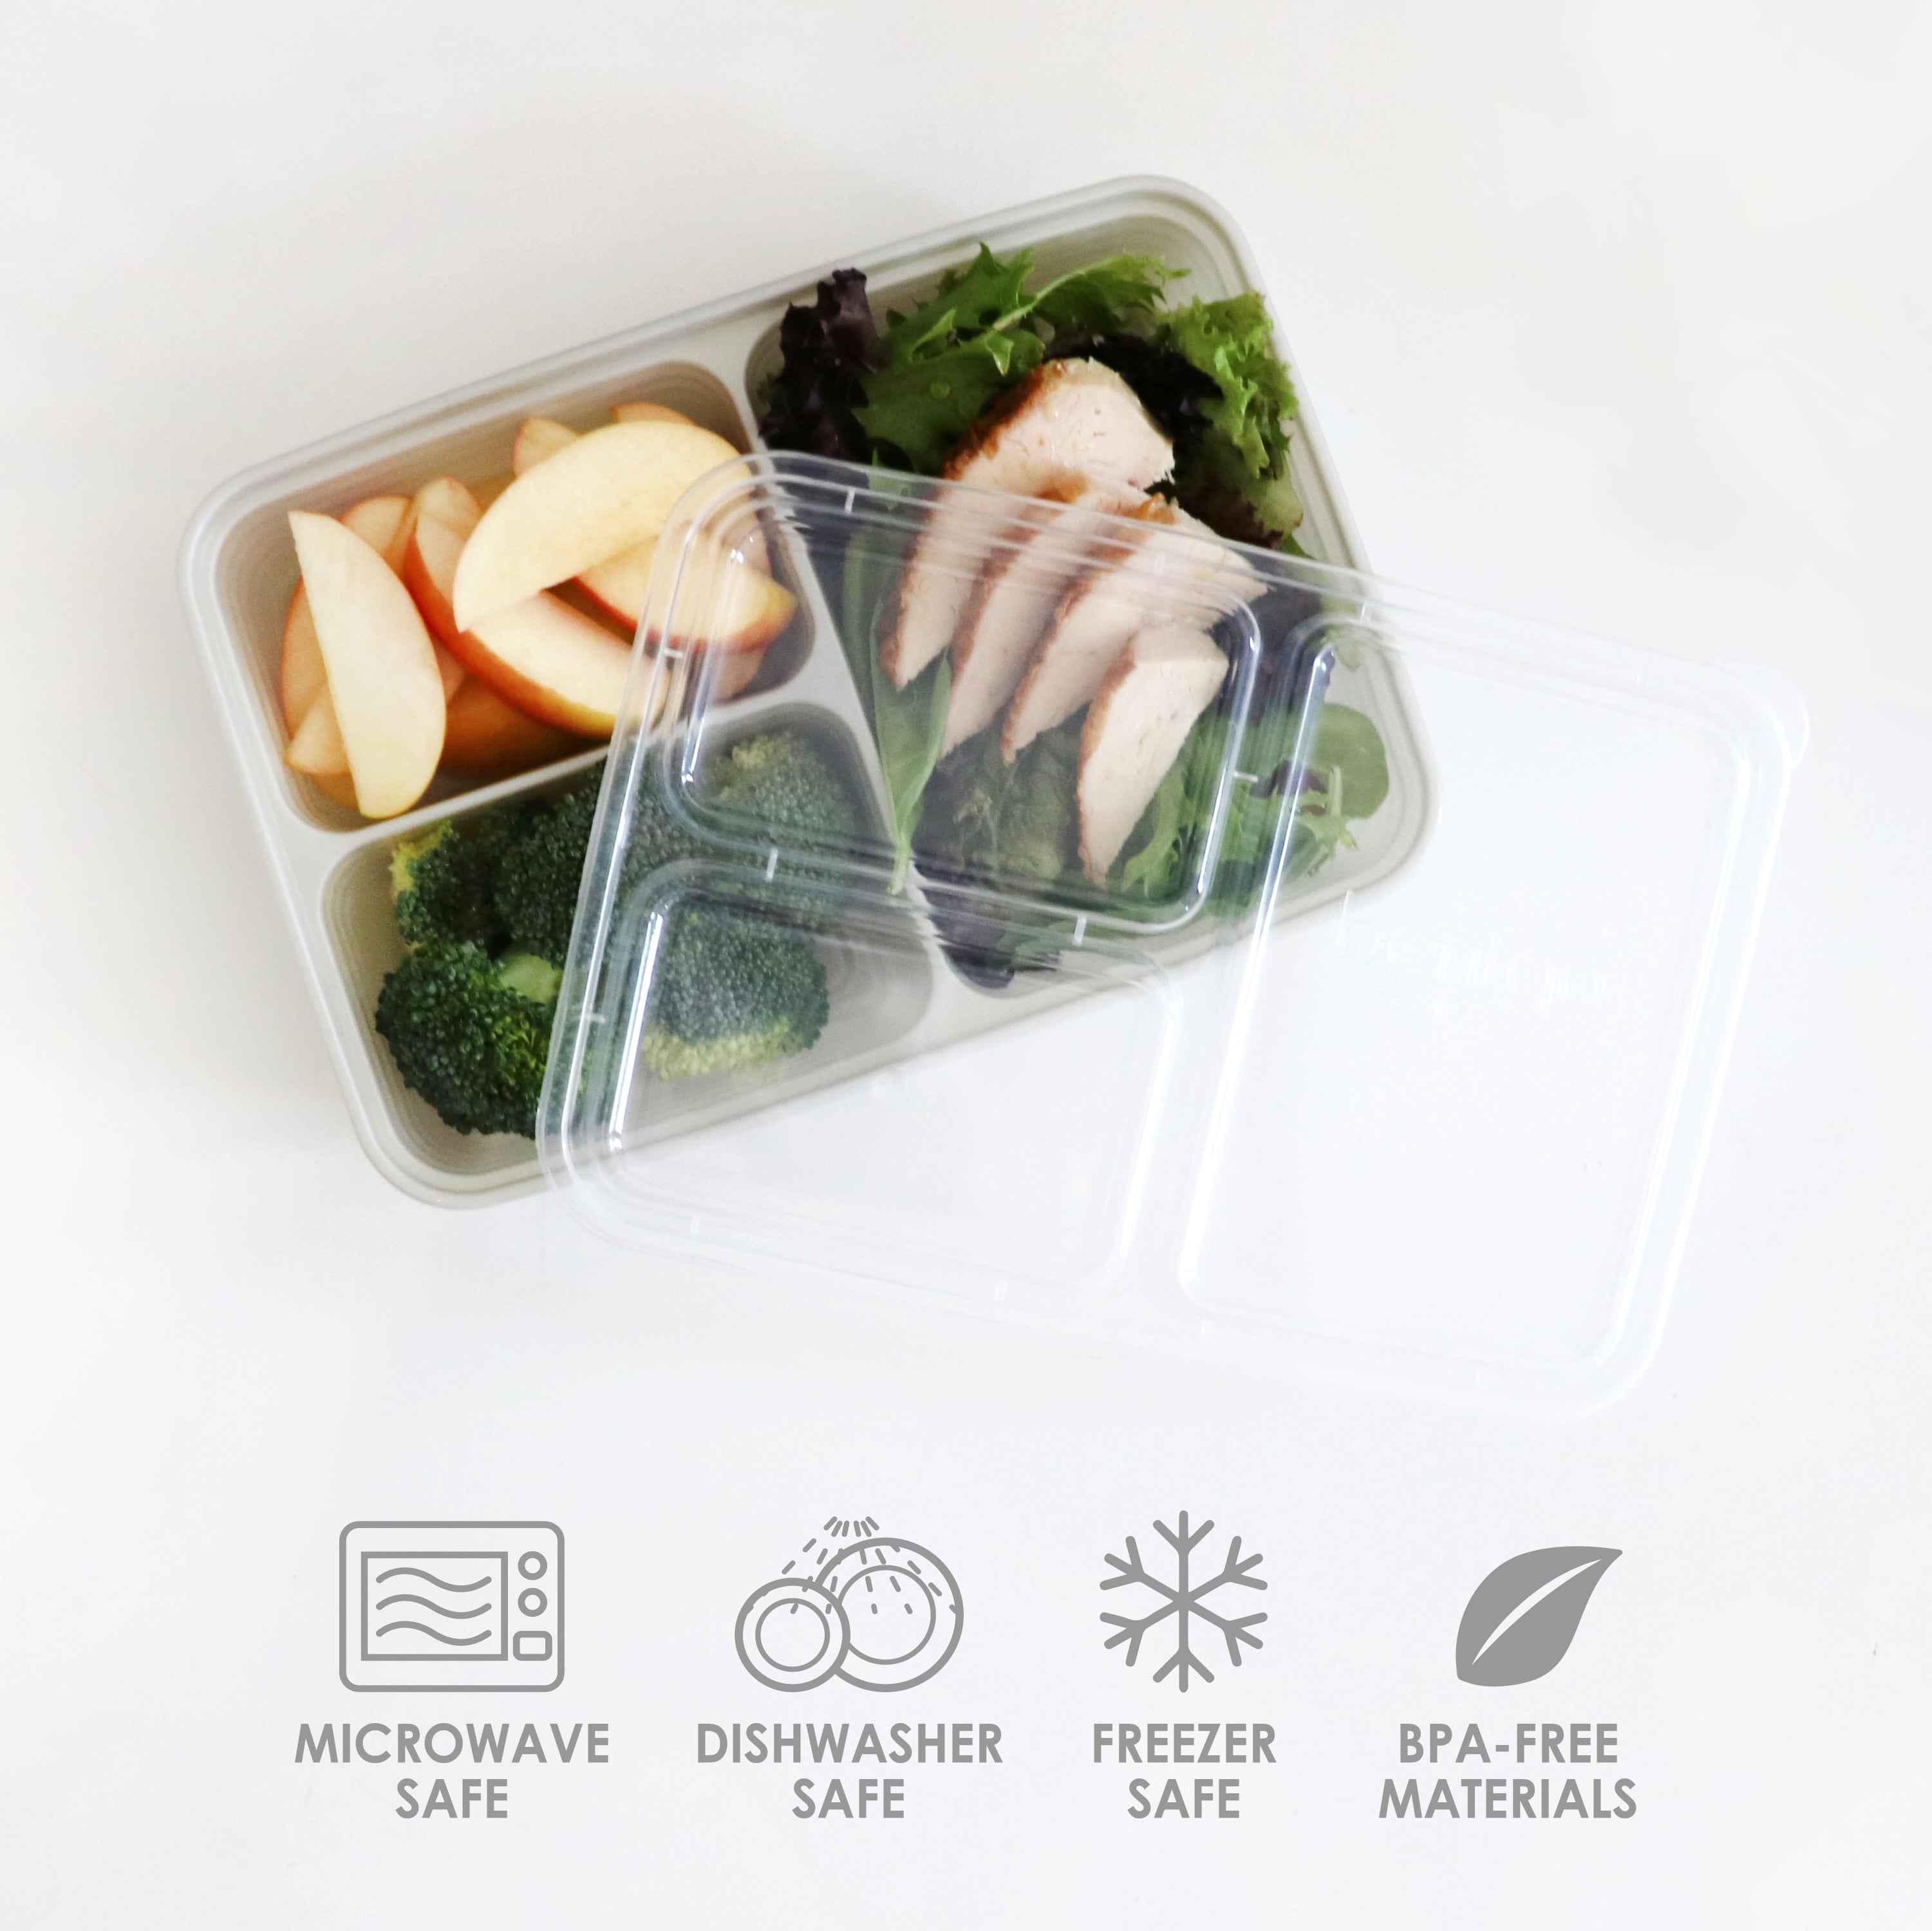  Glotoch 20 Pack Meal Prep Container Reusable 1-Compartment 38  oz To Go Containers,Double Use As Divided Food Containers for Portion  Control,Bento Box,Microwave,Dishwasher,Freezer Safe BPA Free,Pink: Home &  Kitchen